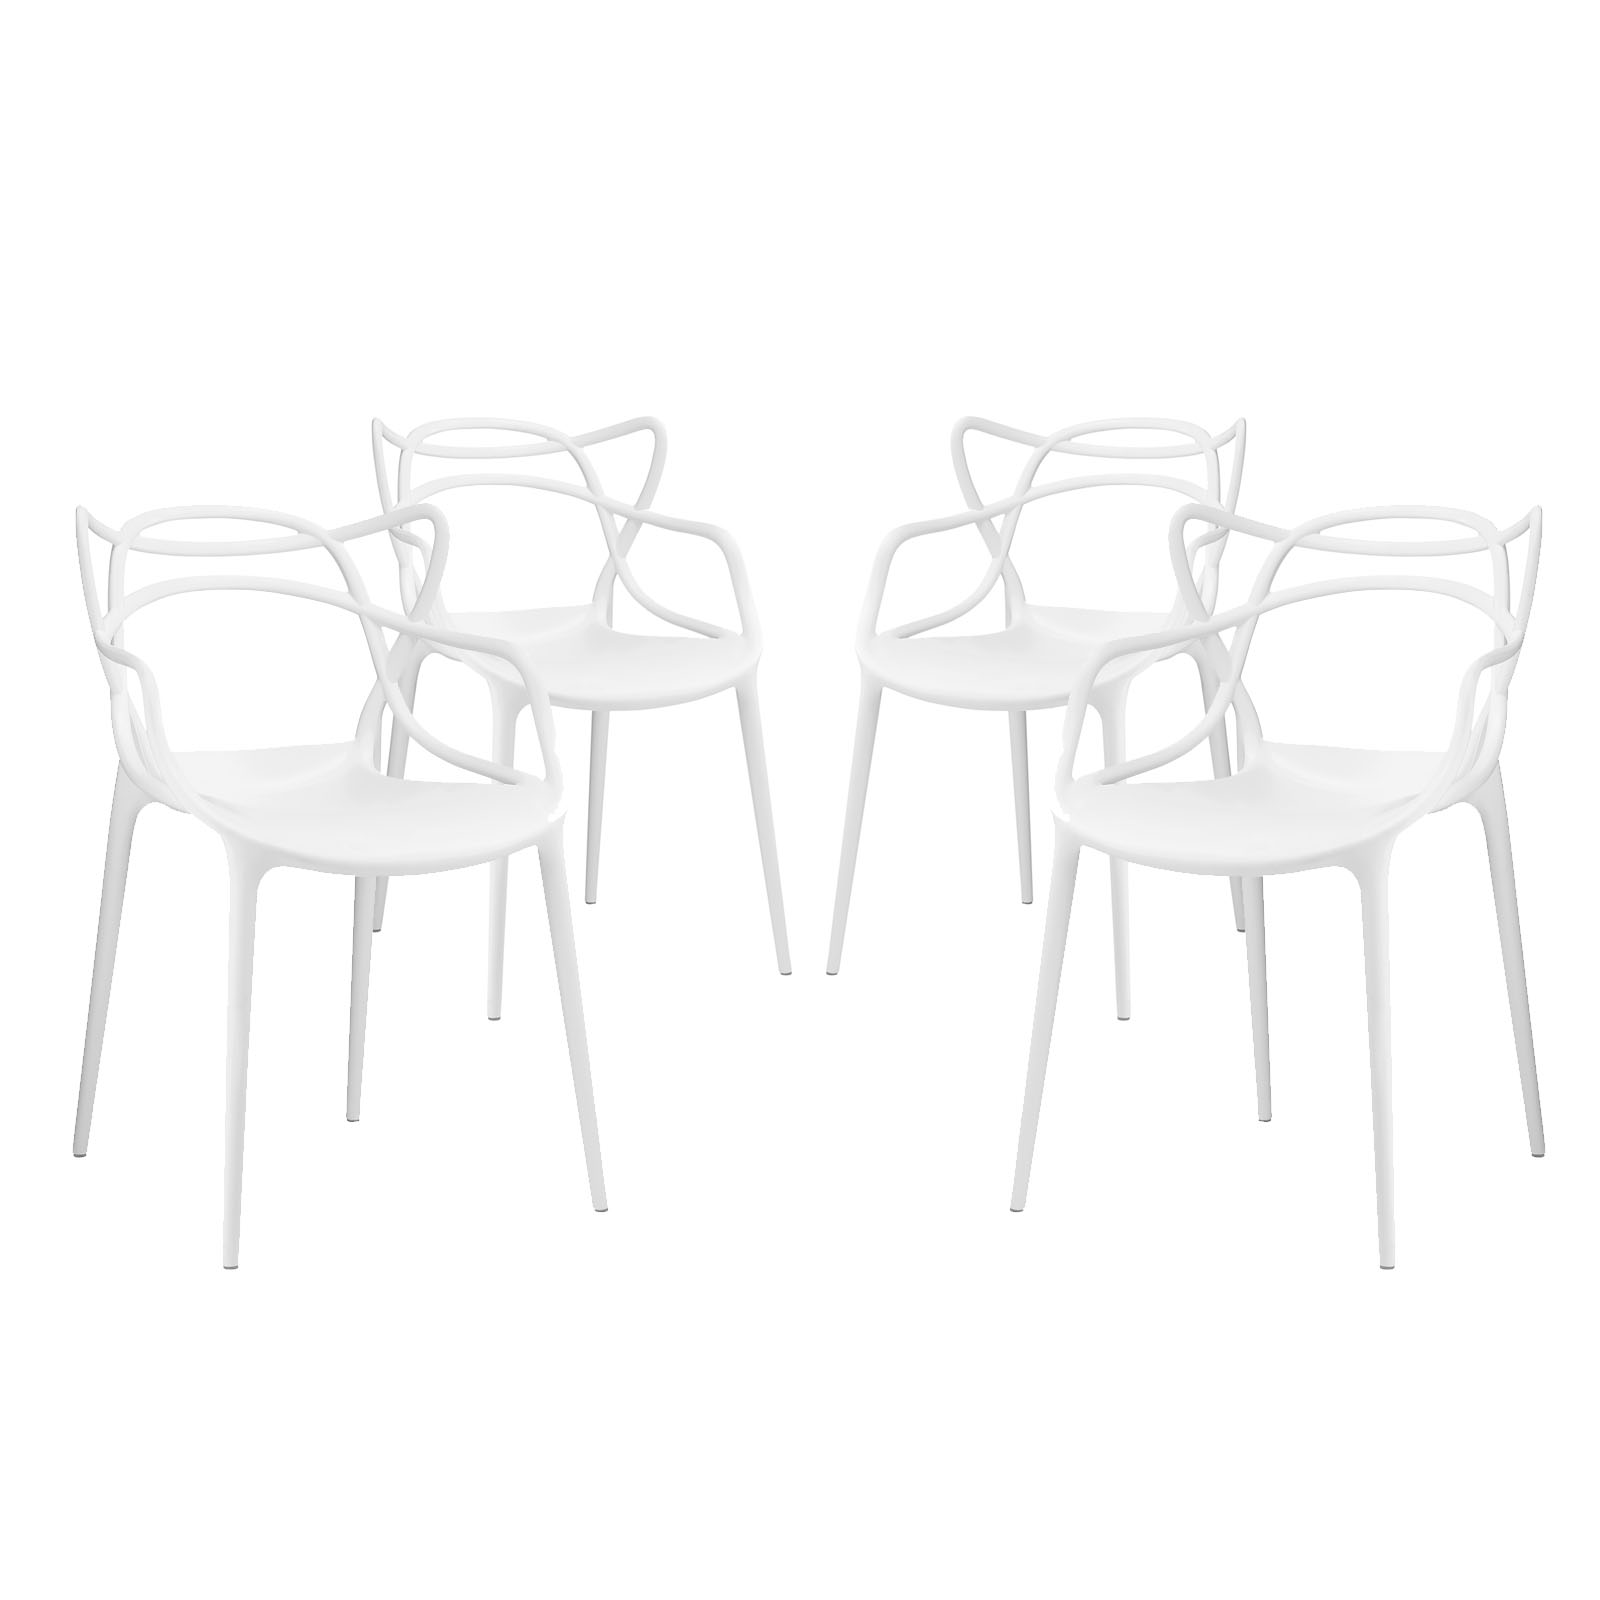 Modern Contemporary Urban Design Outdoor Kitchen Room Dining Chair Set ( Set of 4), White, Plastic - image 1 of 4